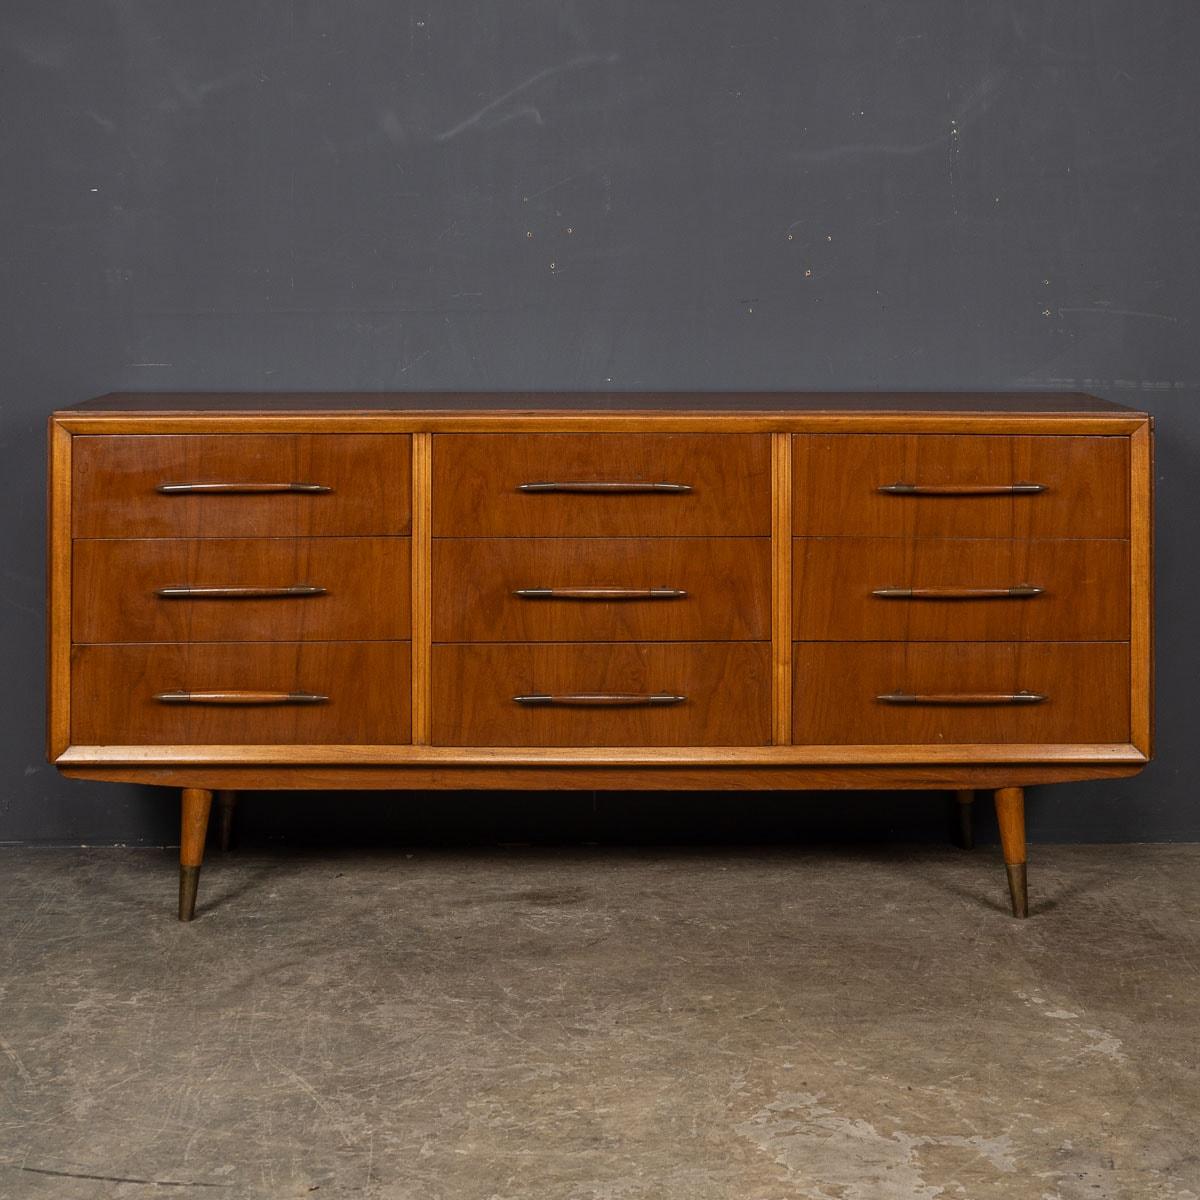 An Italian-made wooden credenza from the captivating mid-20th Century era. This distinguished piece features a total of nine drawers adorned with timeless, atomic-style brass-tipped handles, all elegantly supported by four legs accented with brass